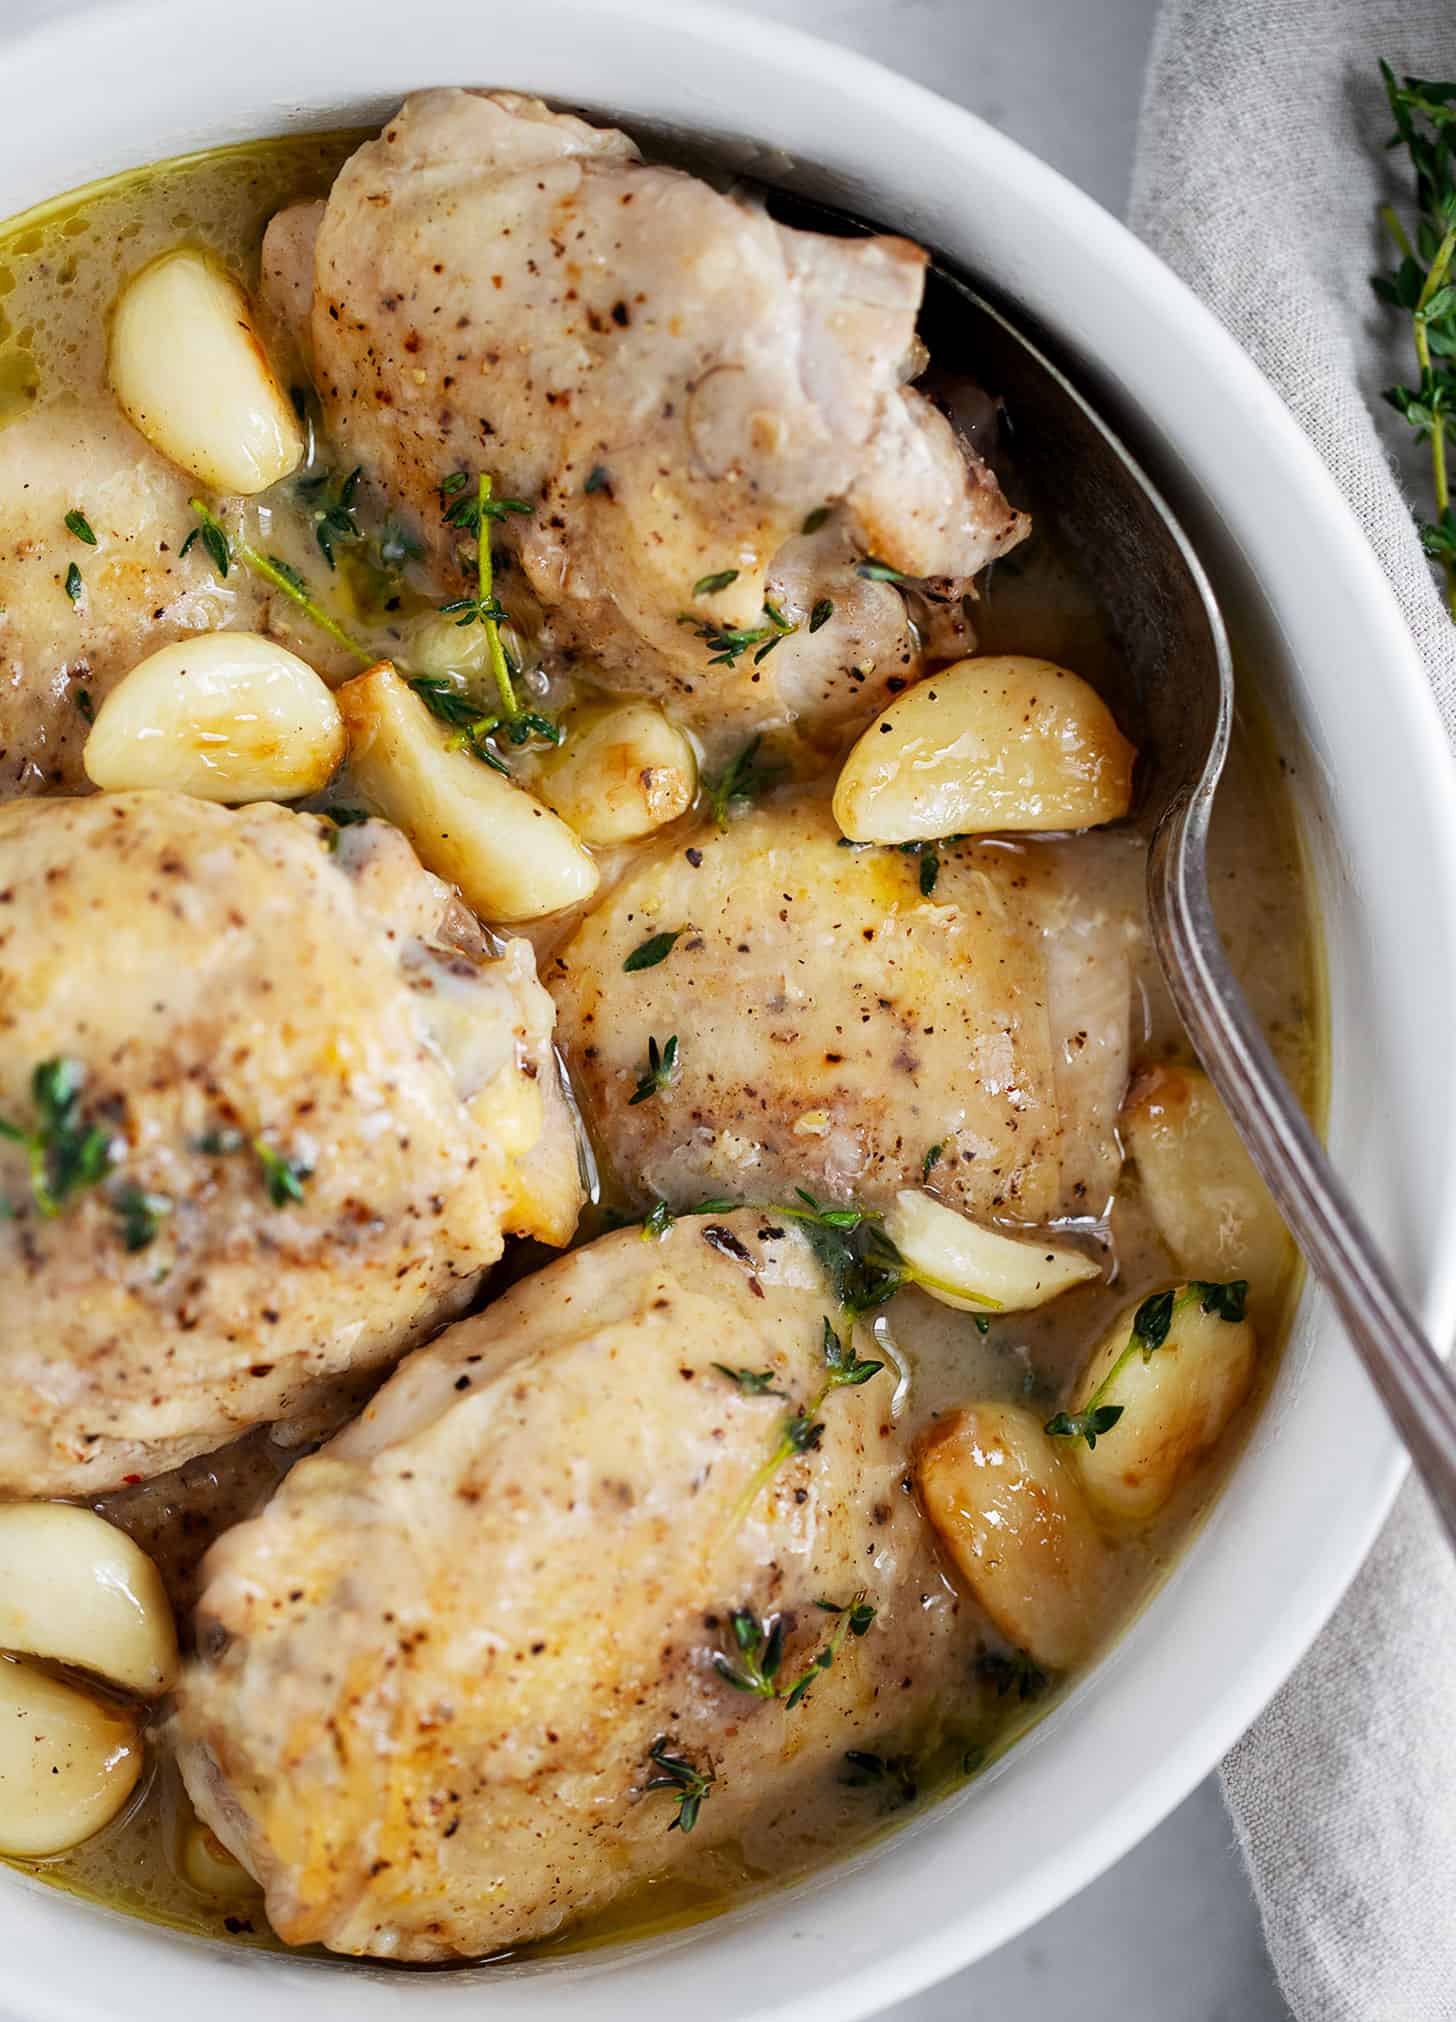 Rustic garlic chicken with gravy in bowl with spoon.